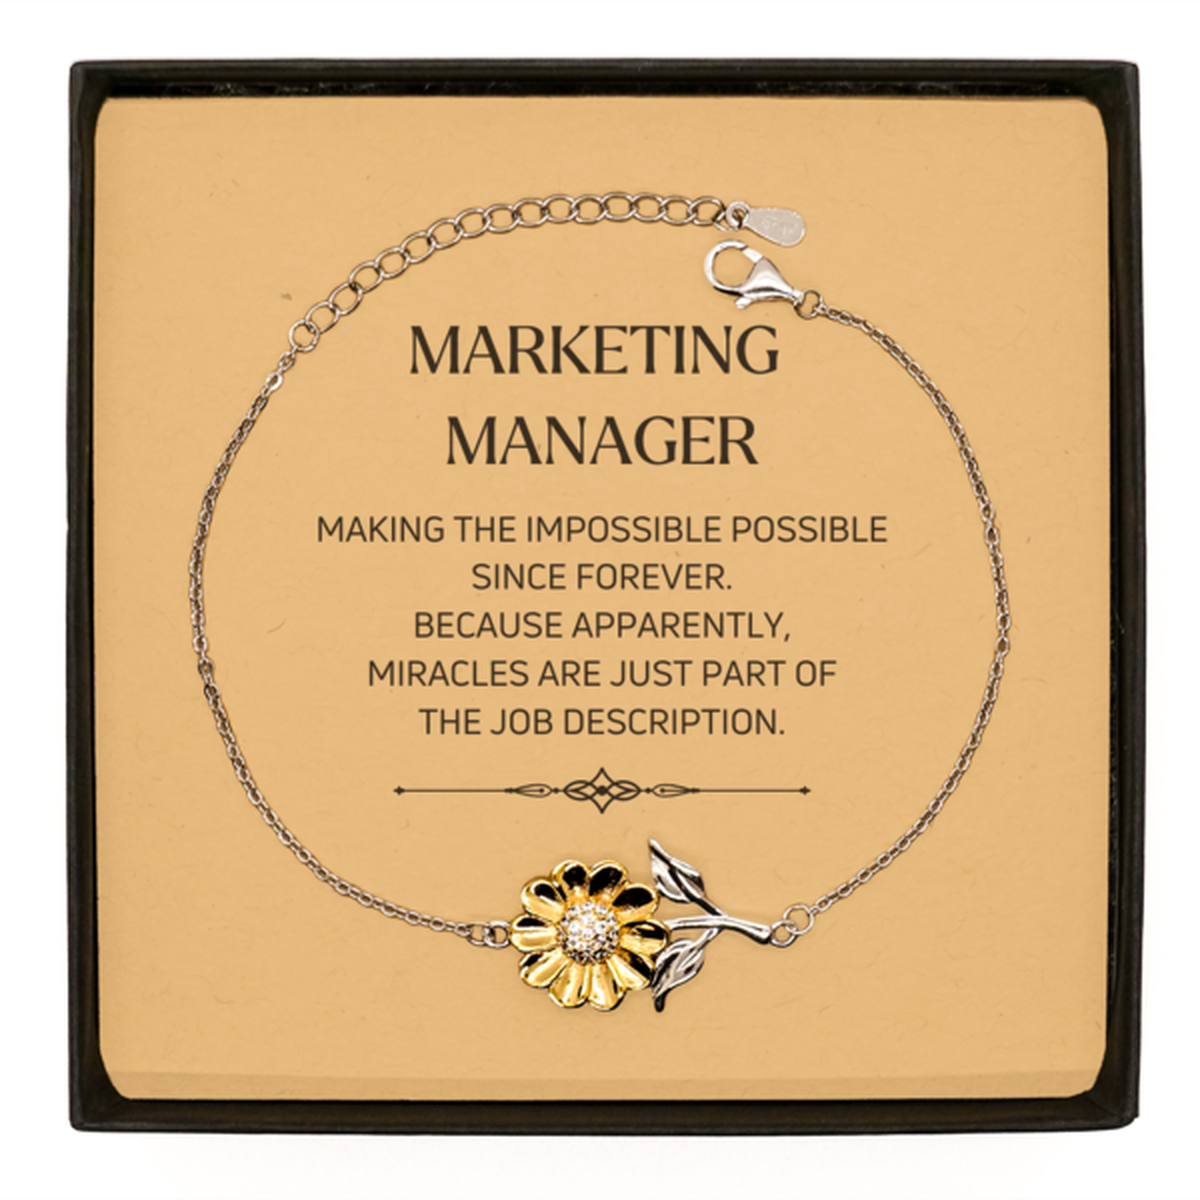 Funny Marketing Manager Gifts, Miracles are just part of the job description, Inspirational Birthday Sunflower Bracelet For Marketing Manager, Men, Women, Coworkers, Friends, Boss